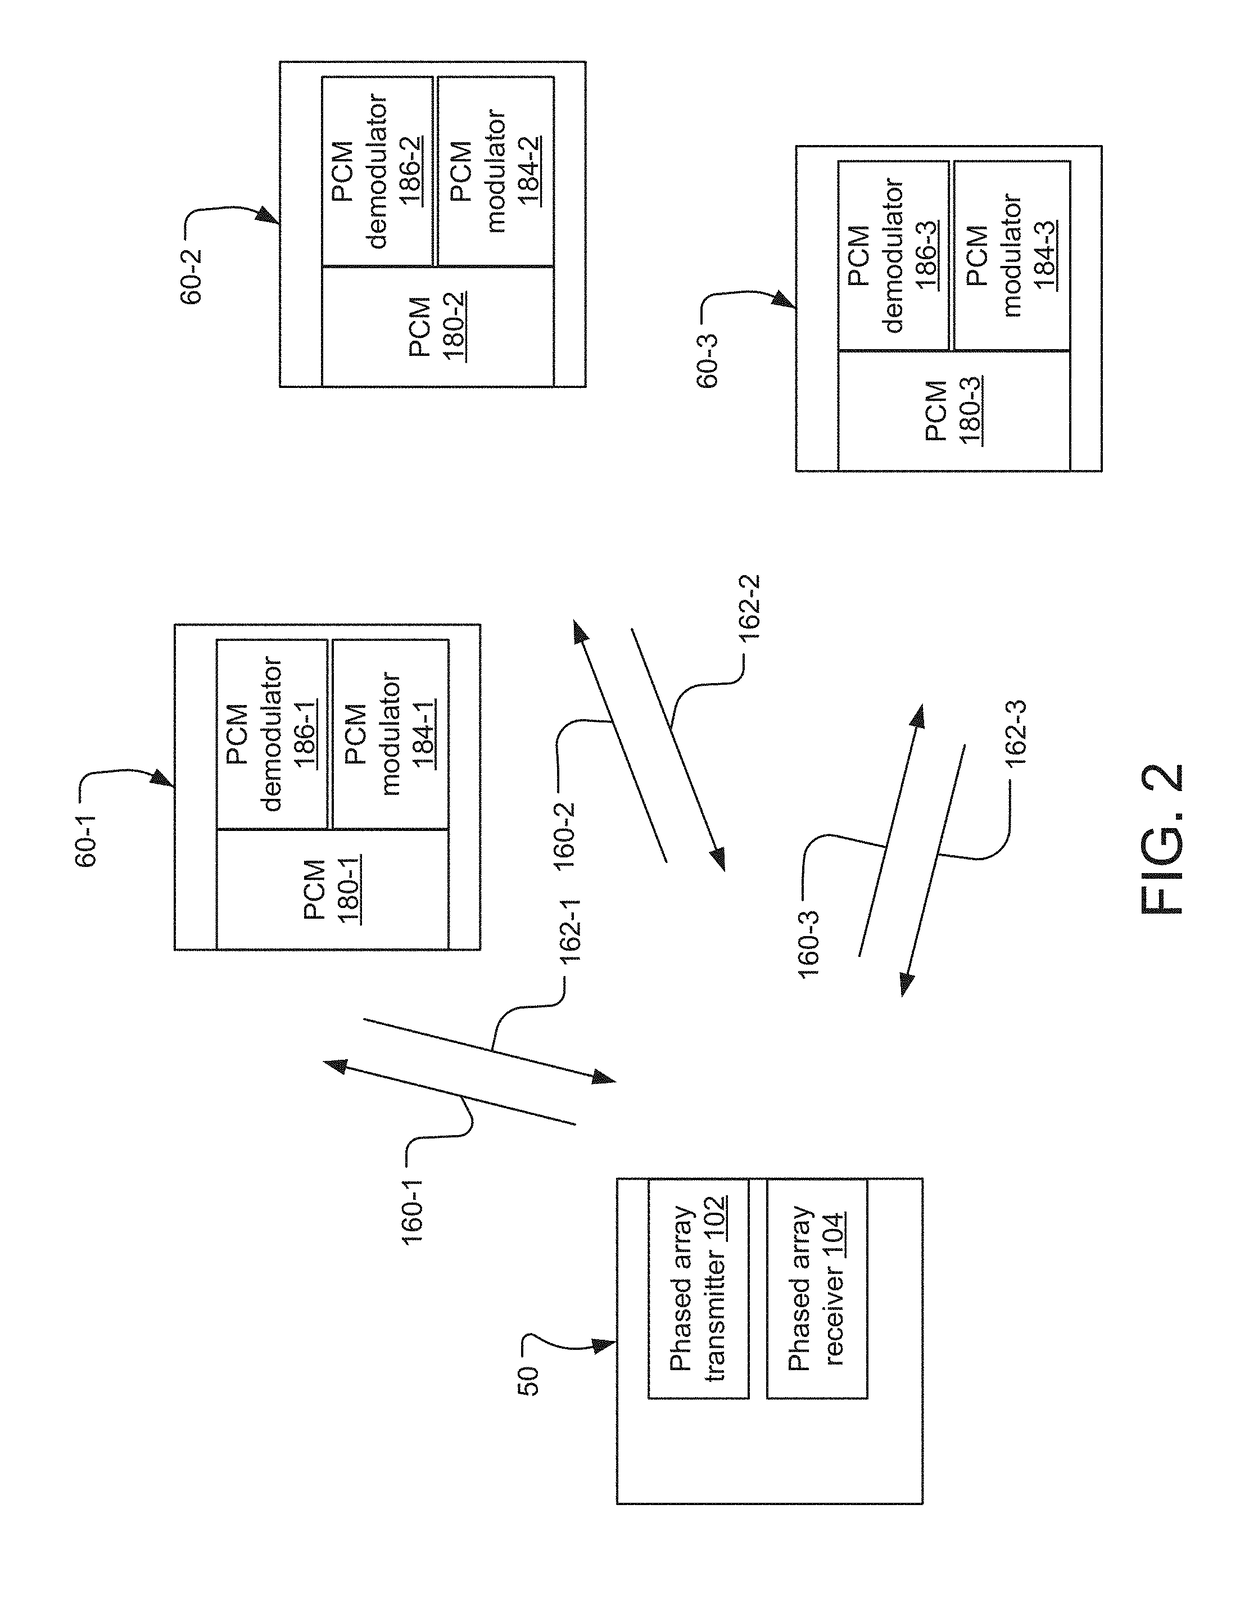 Optical Communications System Phase-Controlled Transmitter and Phase-Conjugate Mirror Receiver